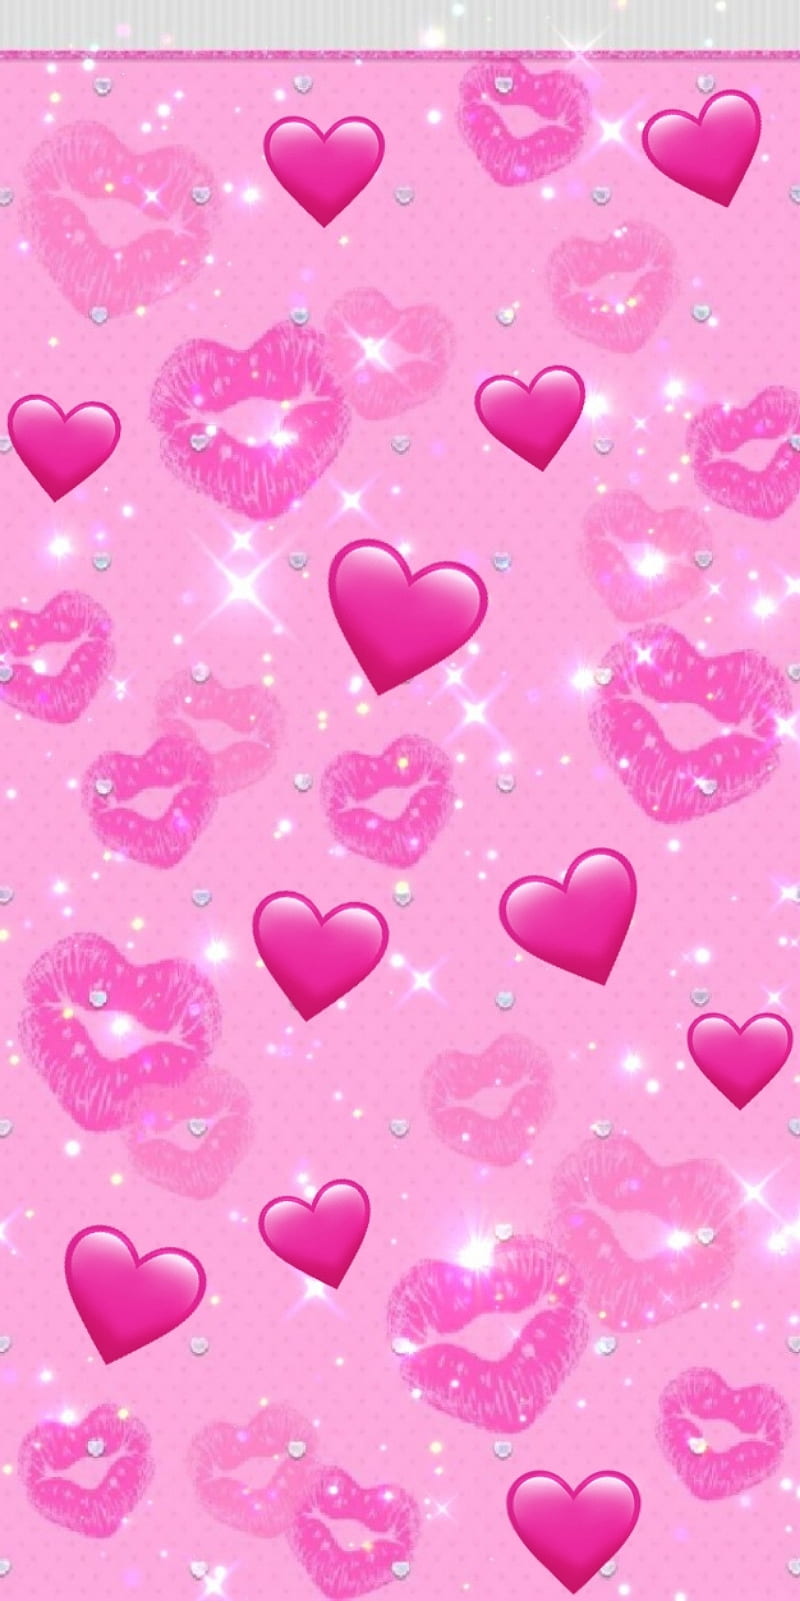 500 Pastel Pink Heart Wallpapers  Background Beautiful Best Available For  Download Pastel Pink Heart Images Free On Zicxacomphotos  Zicxa Photos